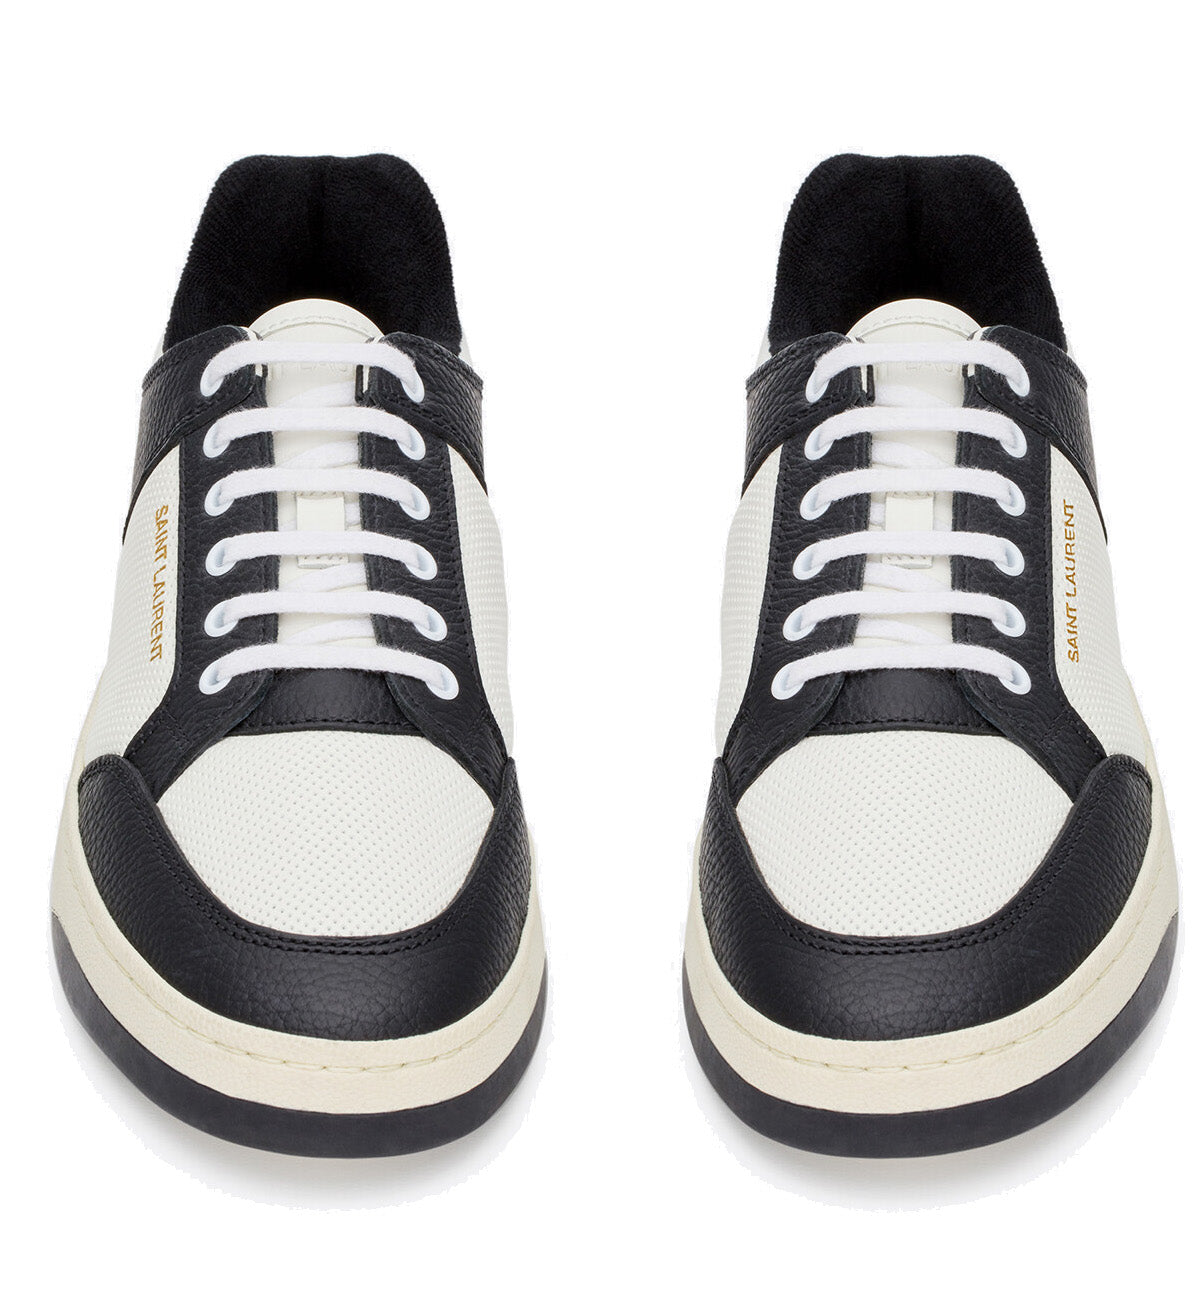 Saint Laurent Perforated Sneaker Black & White – The Factory KL